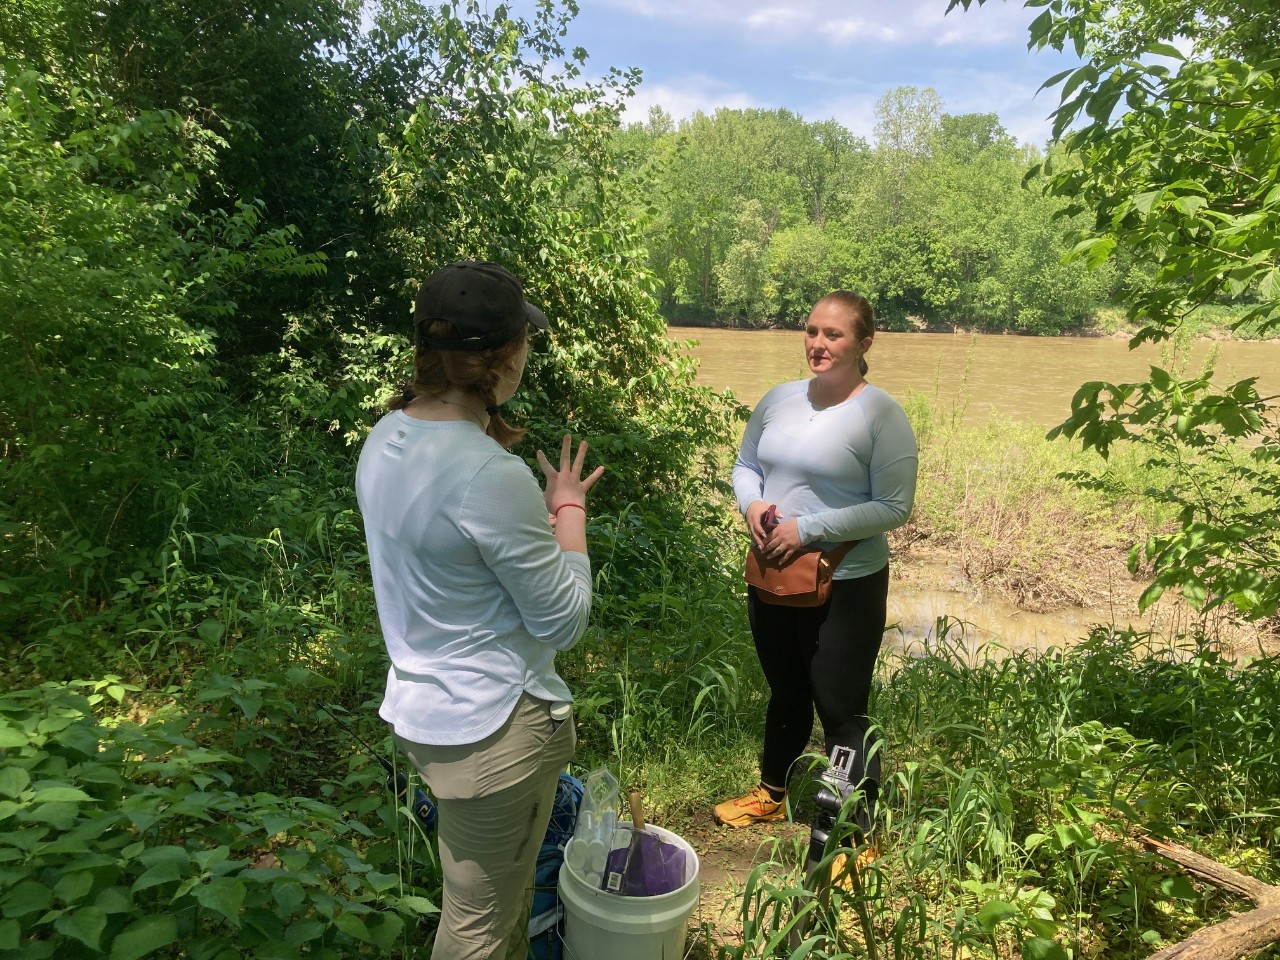 UC doctoral student Megan Naber talks to reporter Alese Underwood on the banks of the Great Miami River.